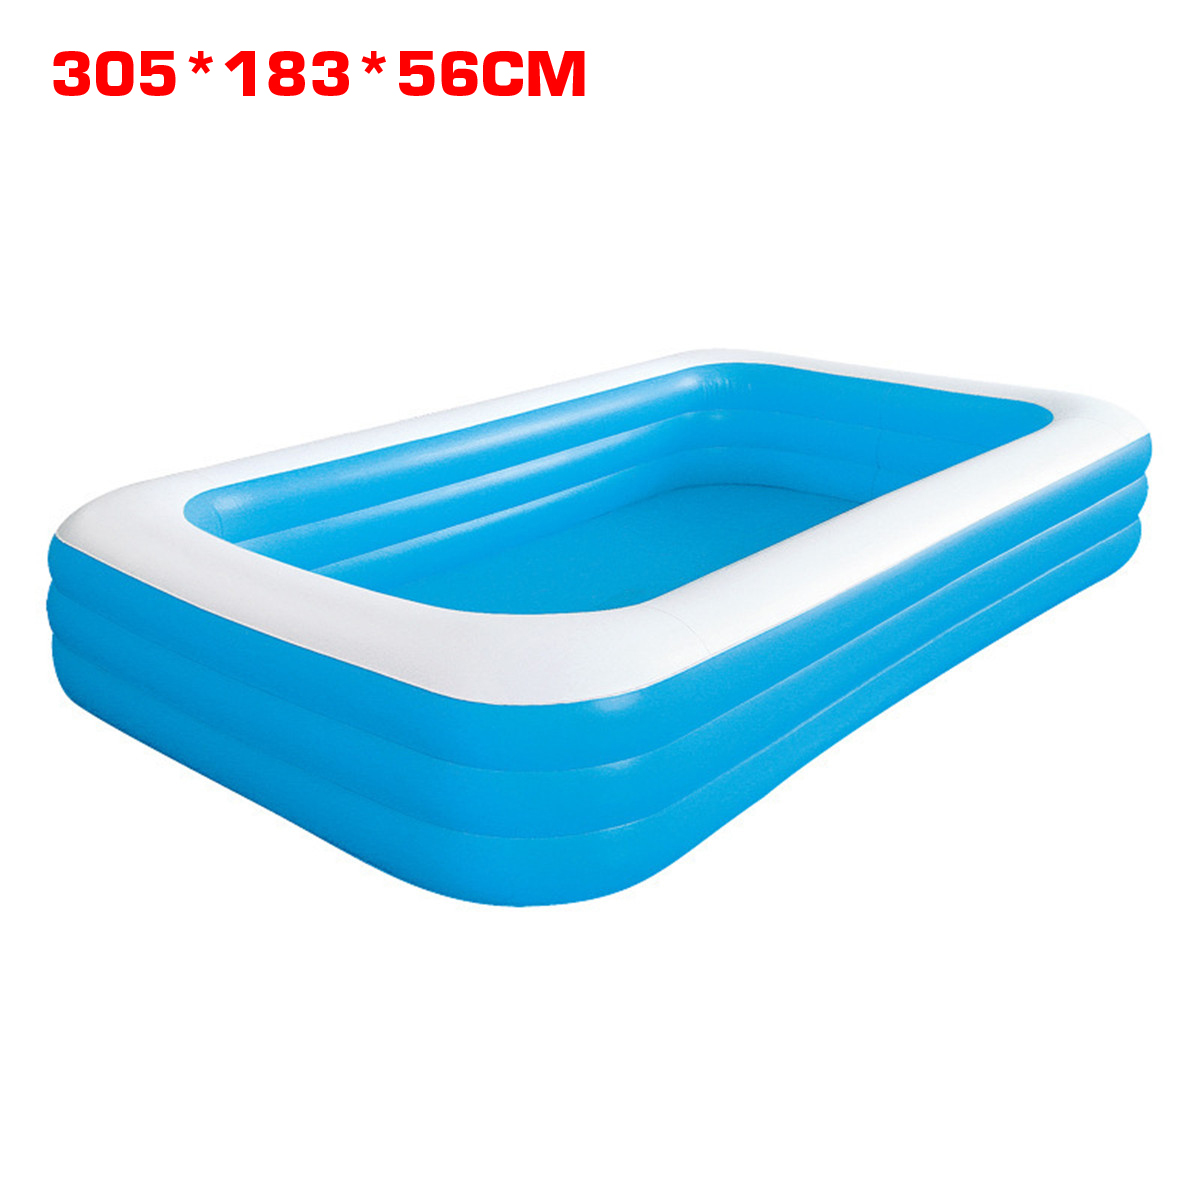 Portable-Outdoor-Inflatable-Swimming-Pool-Childrens-Pool-Family--Indoor-Large-Bathing-Tub-For-Baby-K-1715012-4